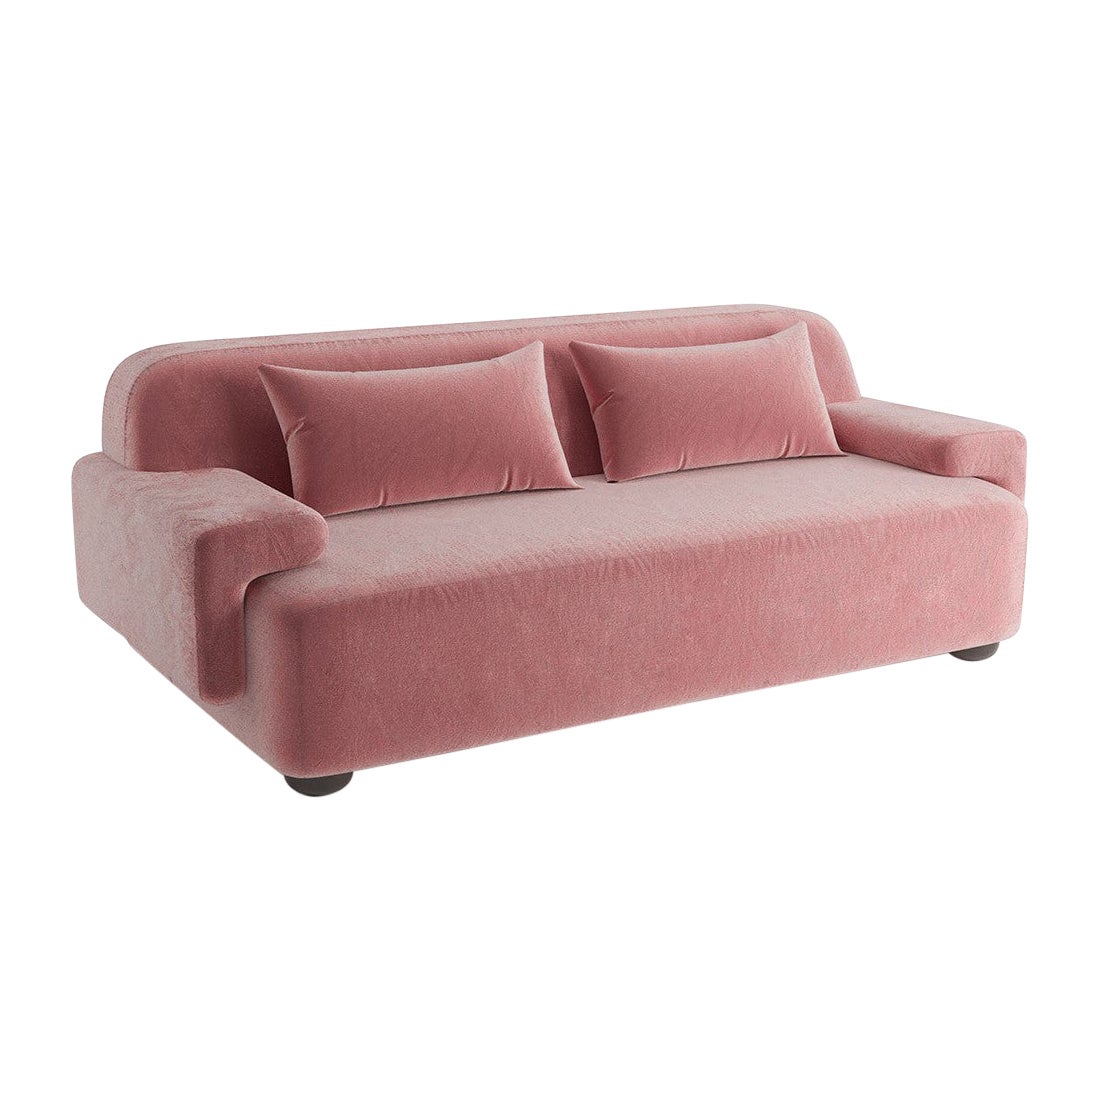 Popus Editions Lena 3 Seater Sofa in Pink Verone Velvet Upholstery For Sale